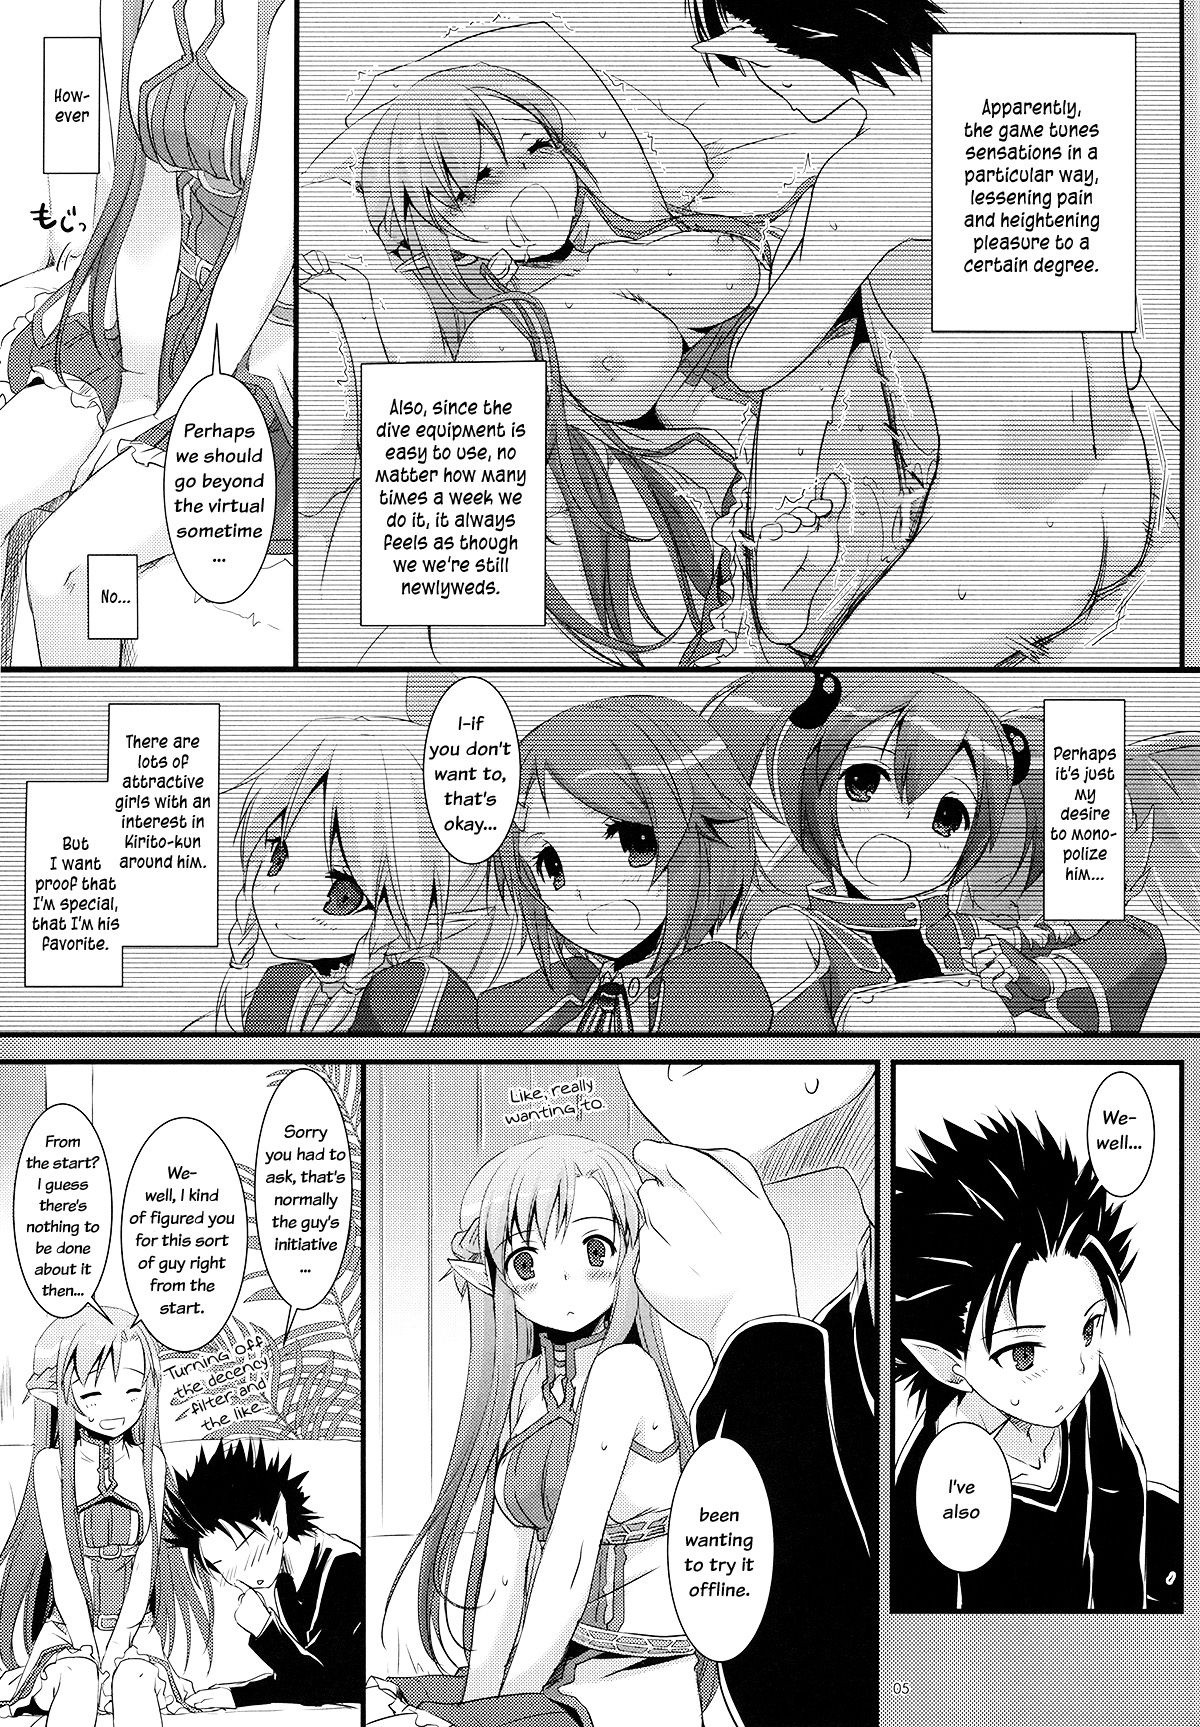 D.L. Action 70 hentai manga picture 4